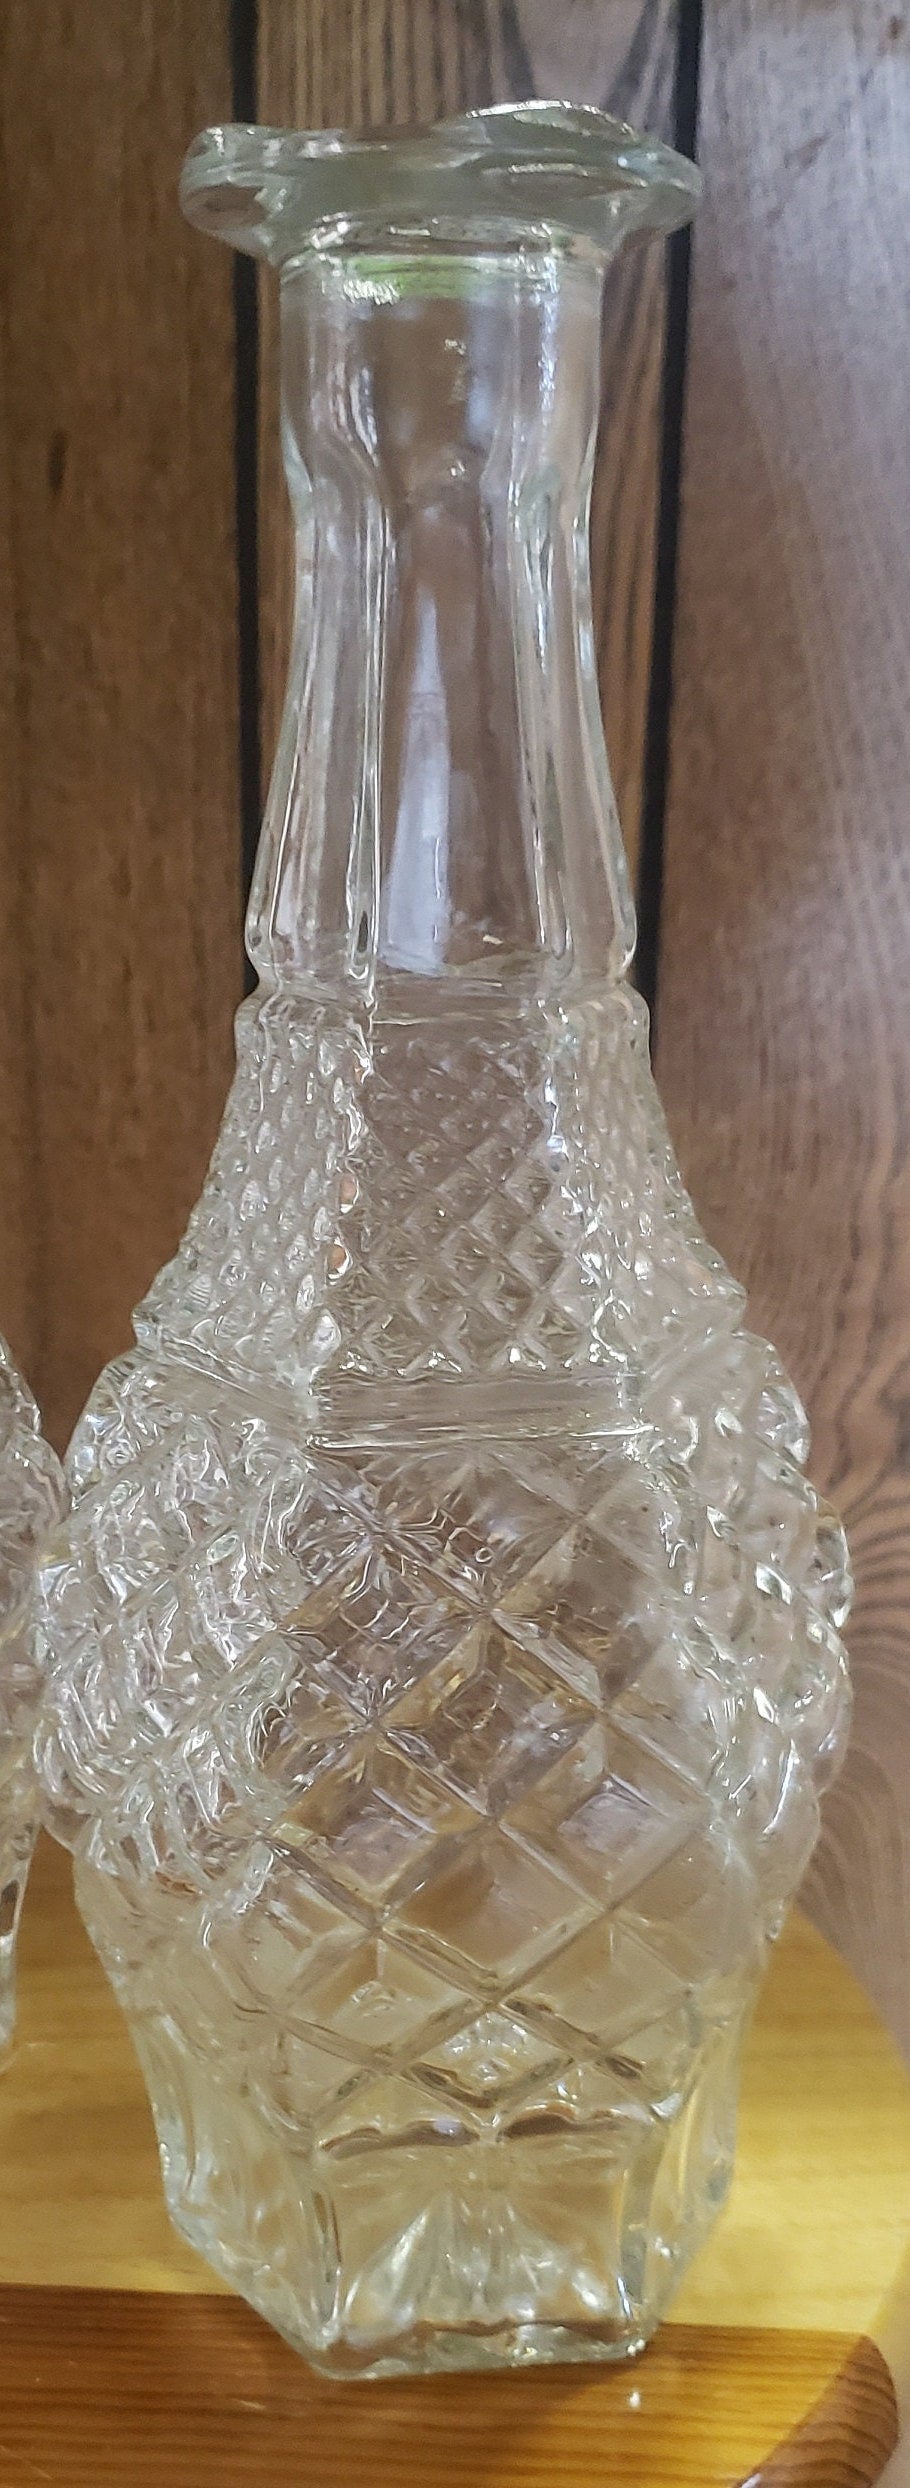 Anchor Hocking Wexford Decanter without Stopper